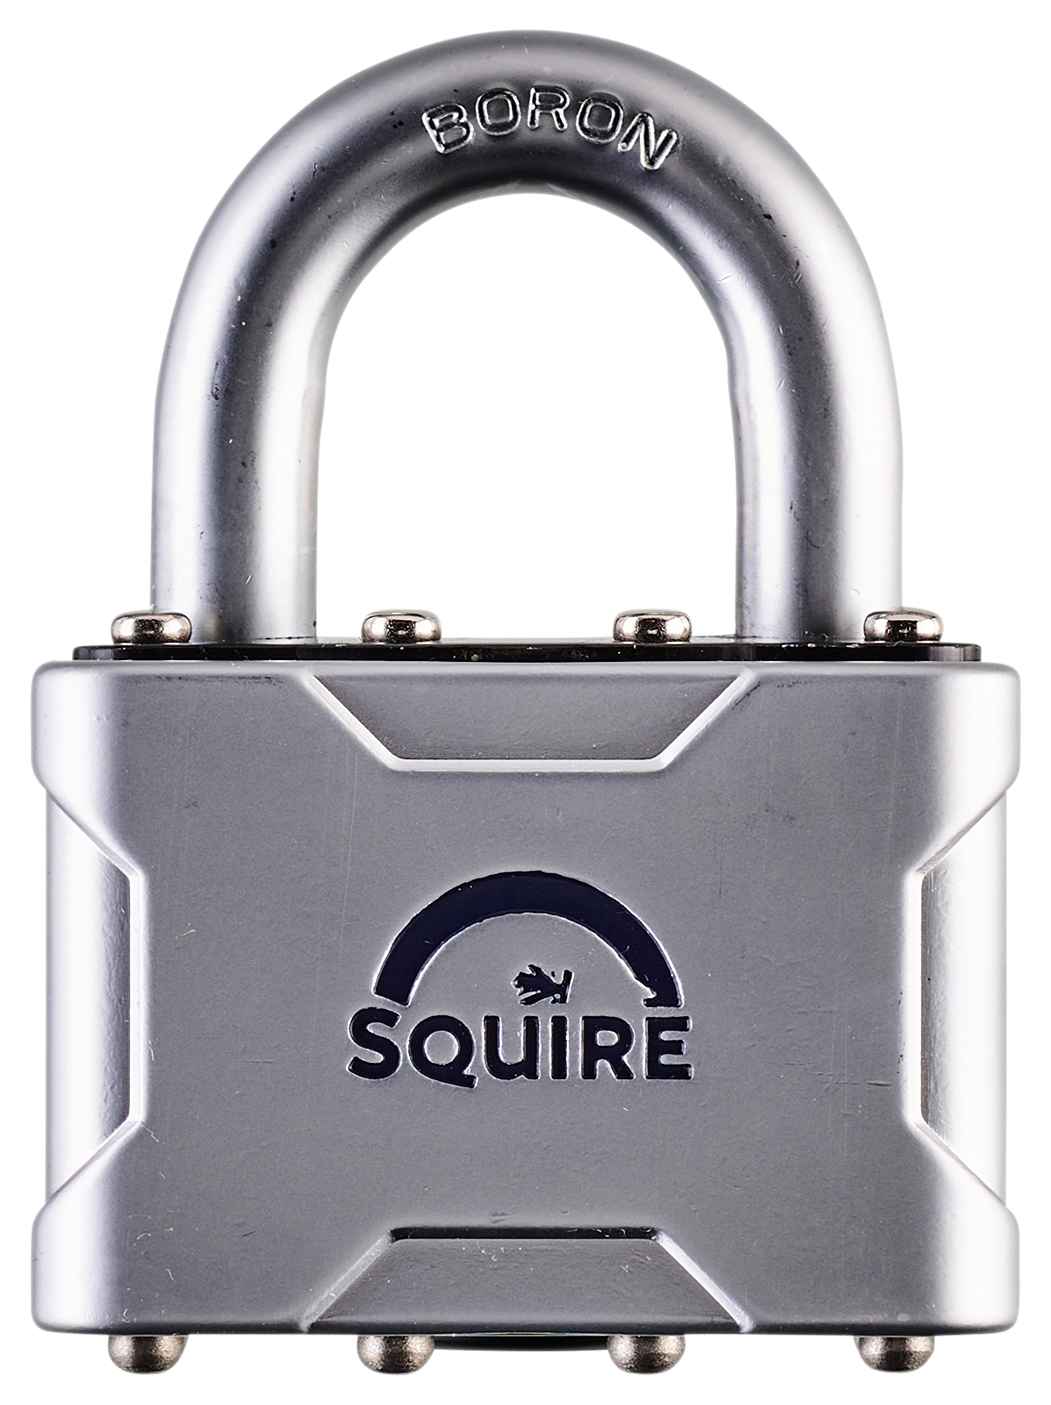 Squire Die Cast Body Cover with Boron Shackle Padlock - 50mm